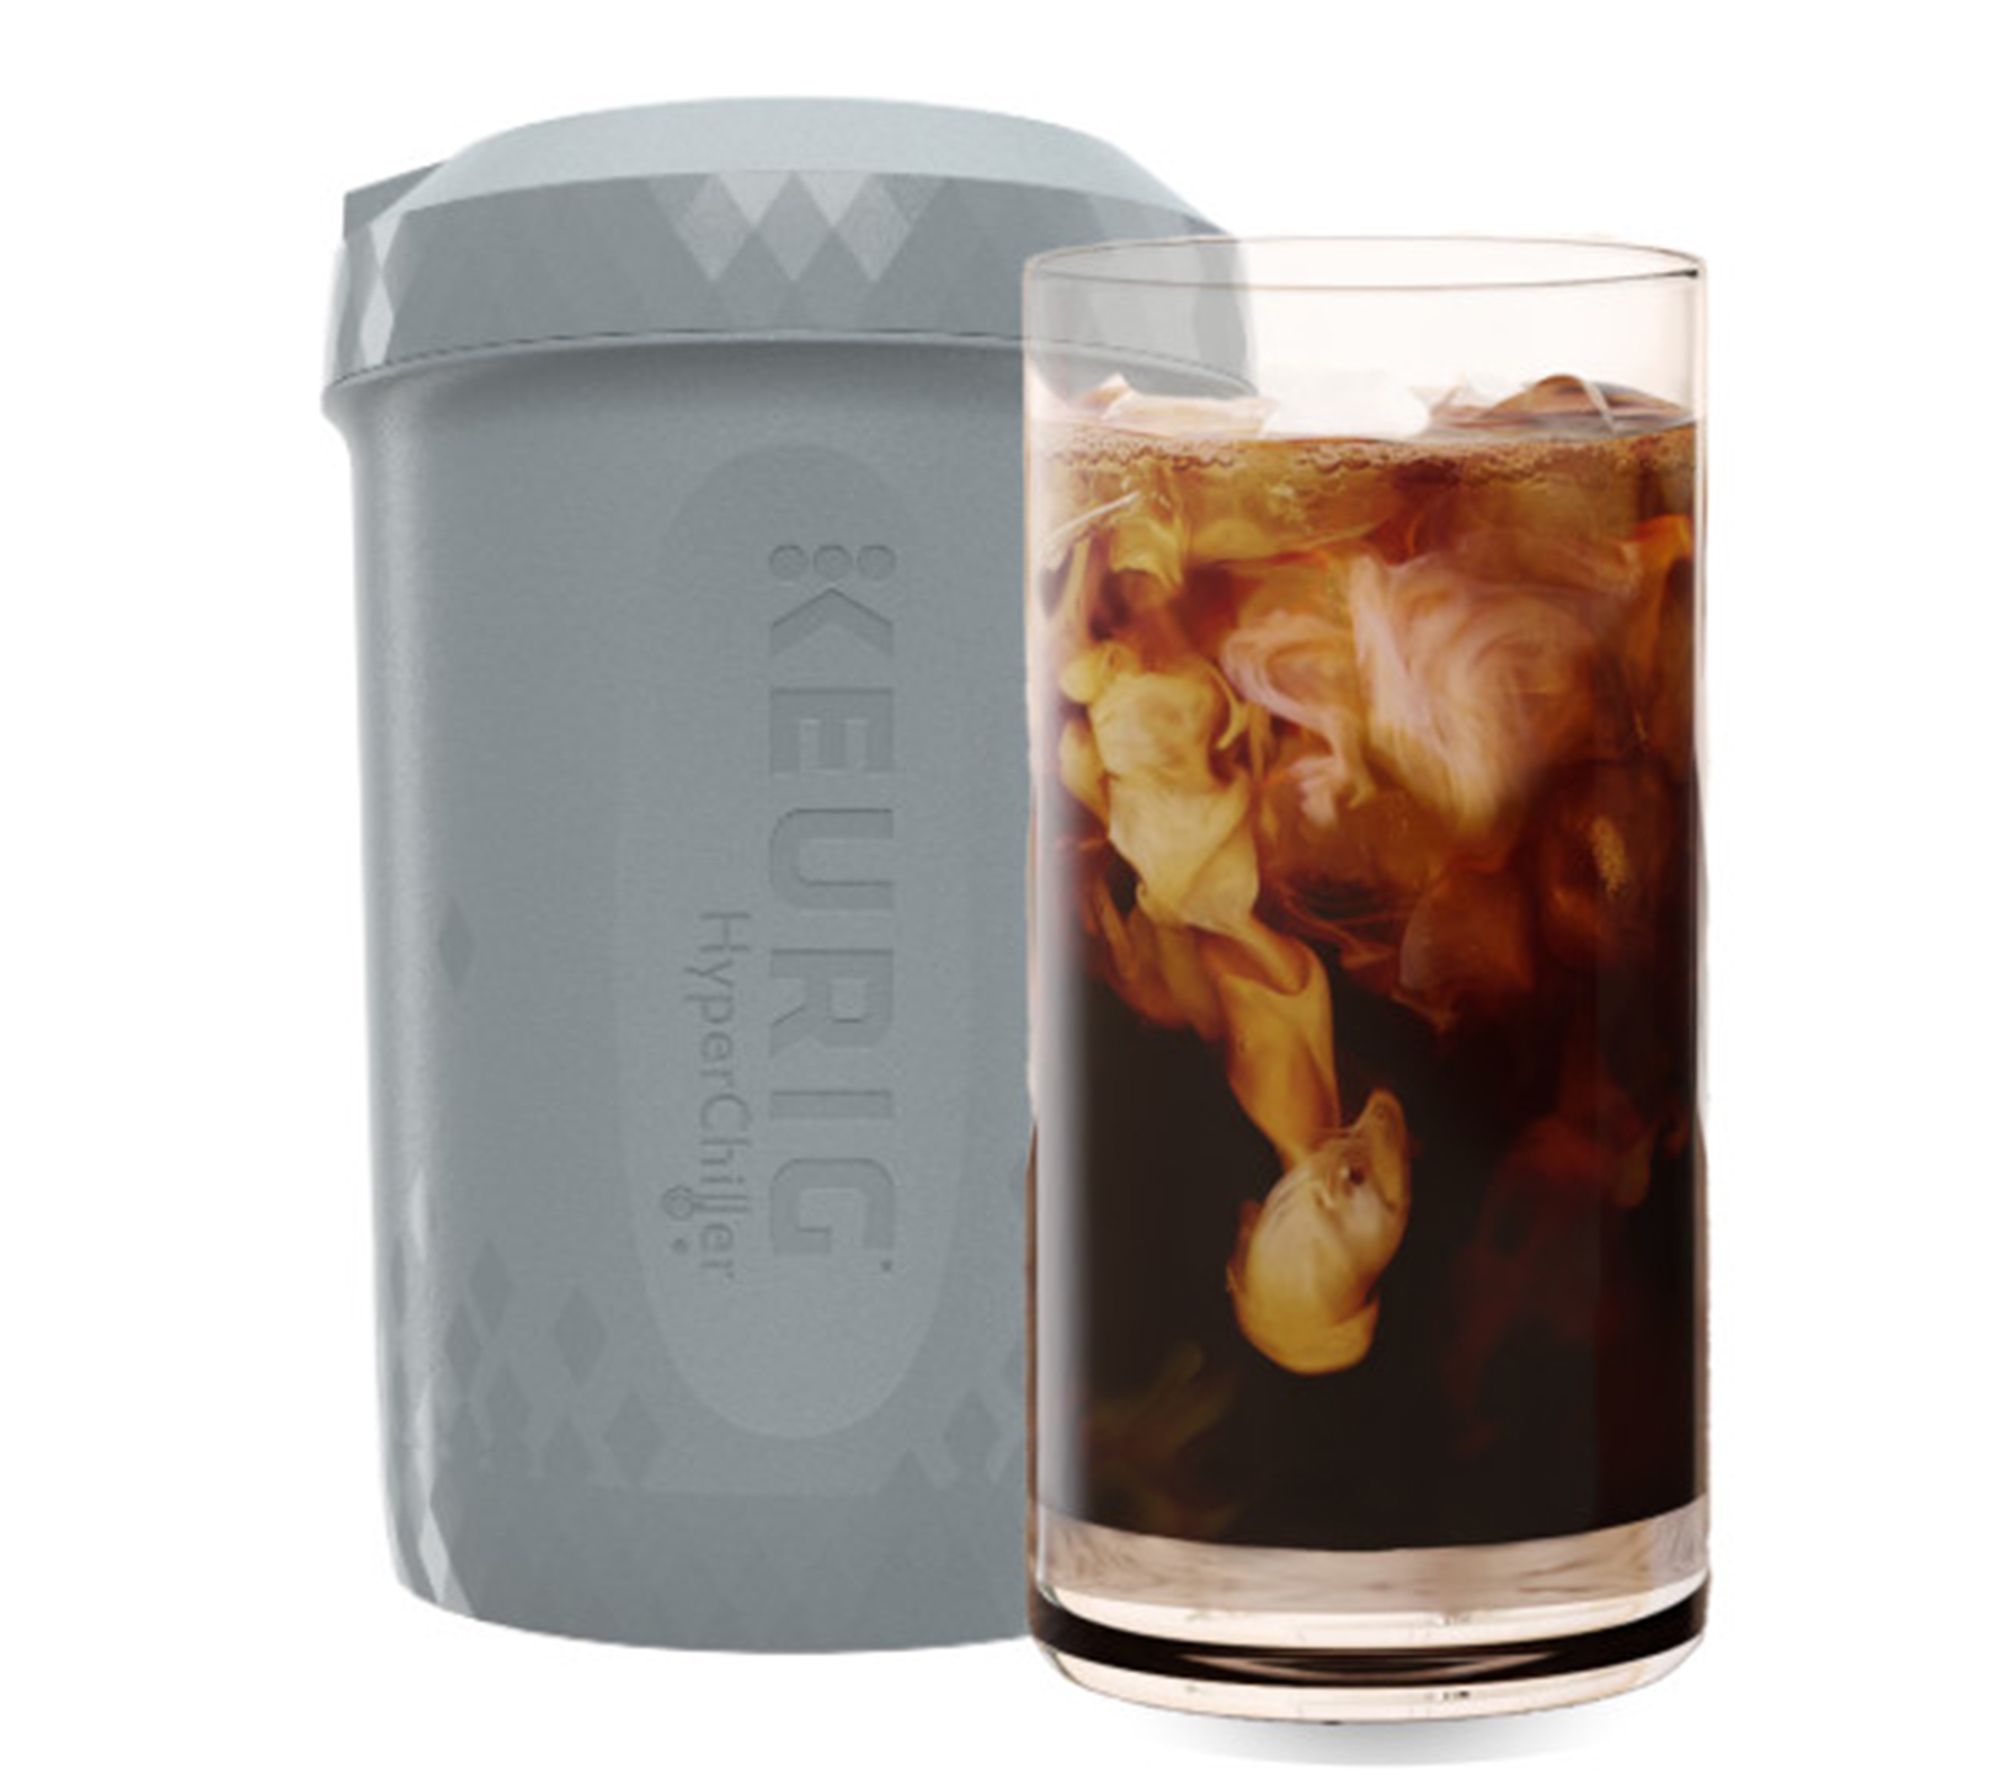 Keurig® ICED Coffee Collection